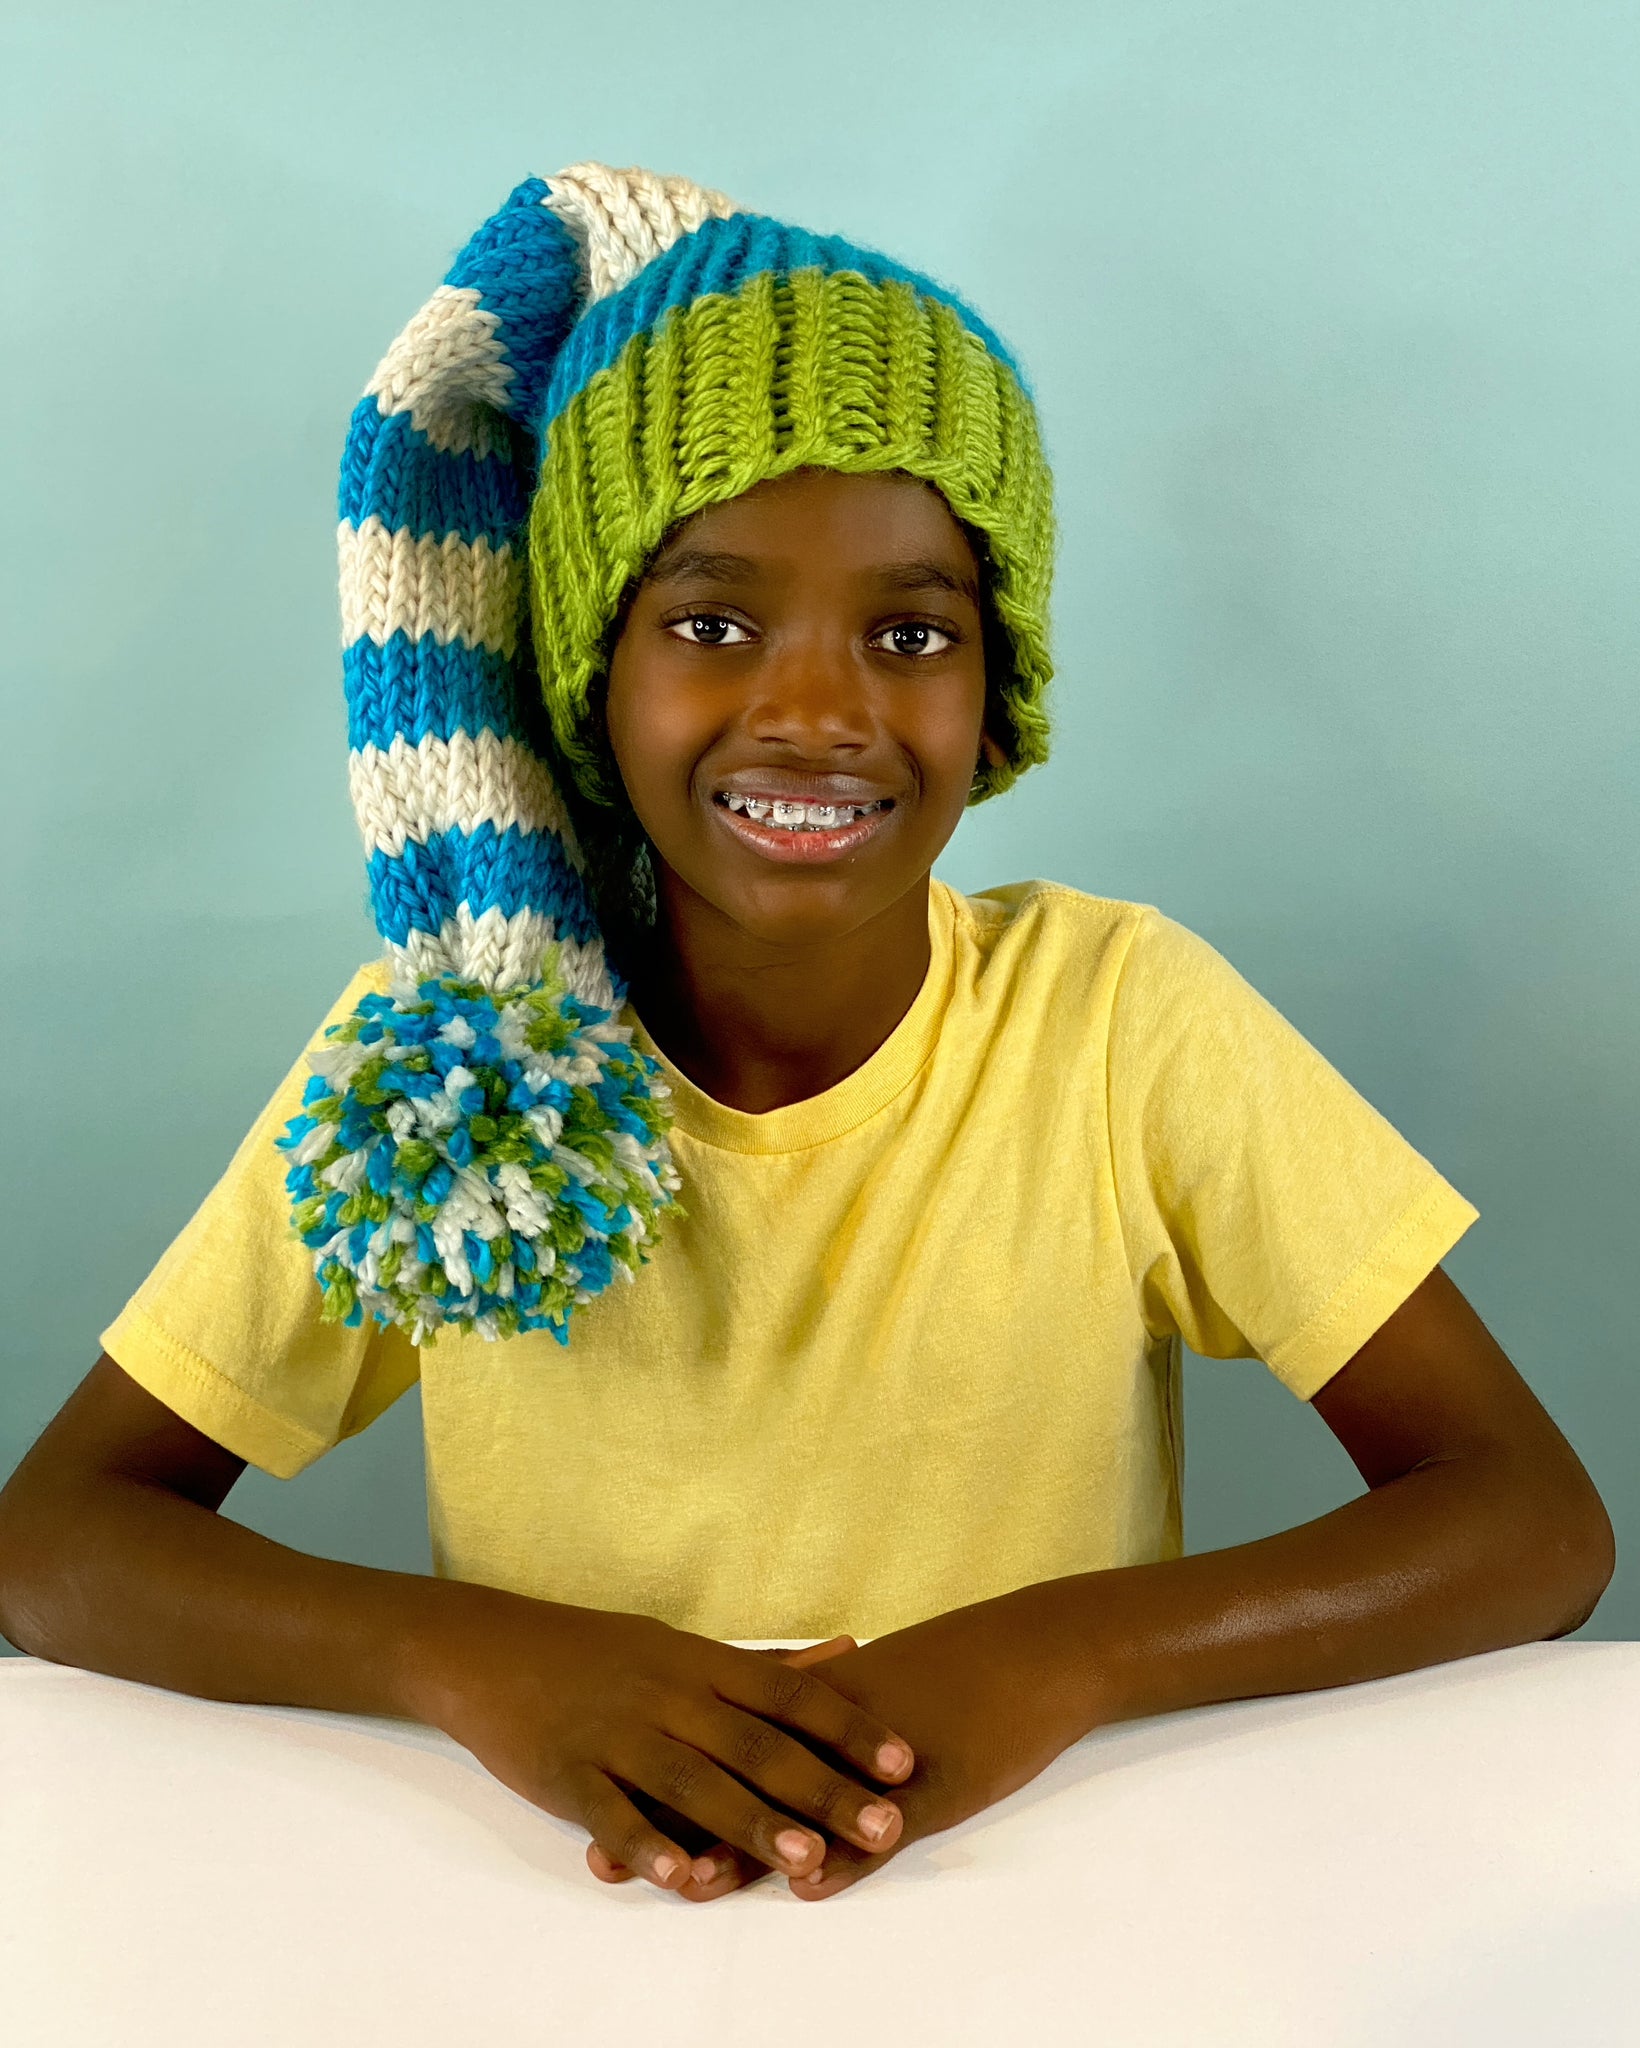 BOYE Loom Hat Kit for Toddlers, 4 patterns total - Chappy's Fiber Arts and  Crafts